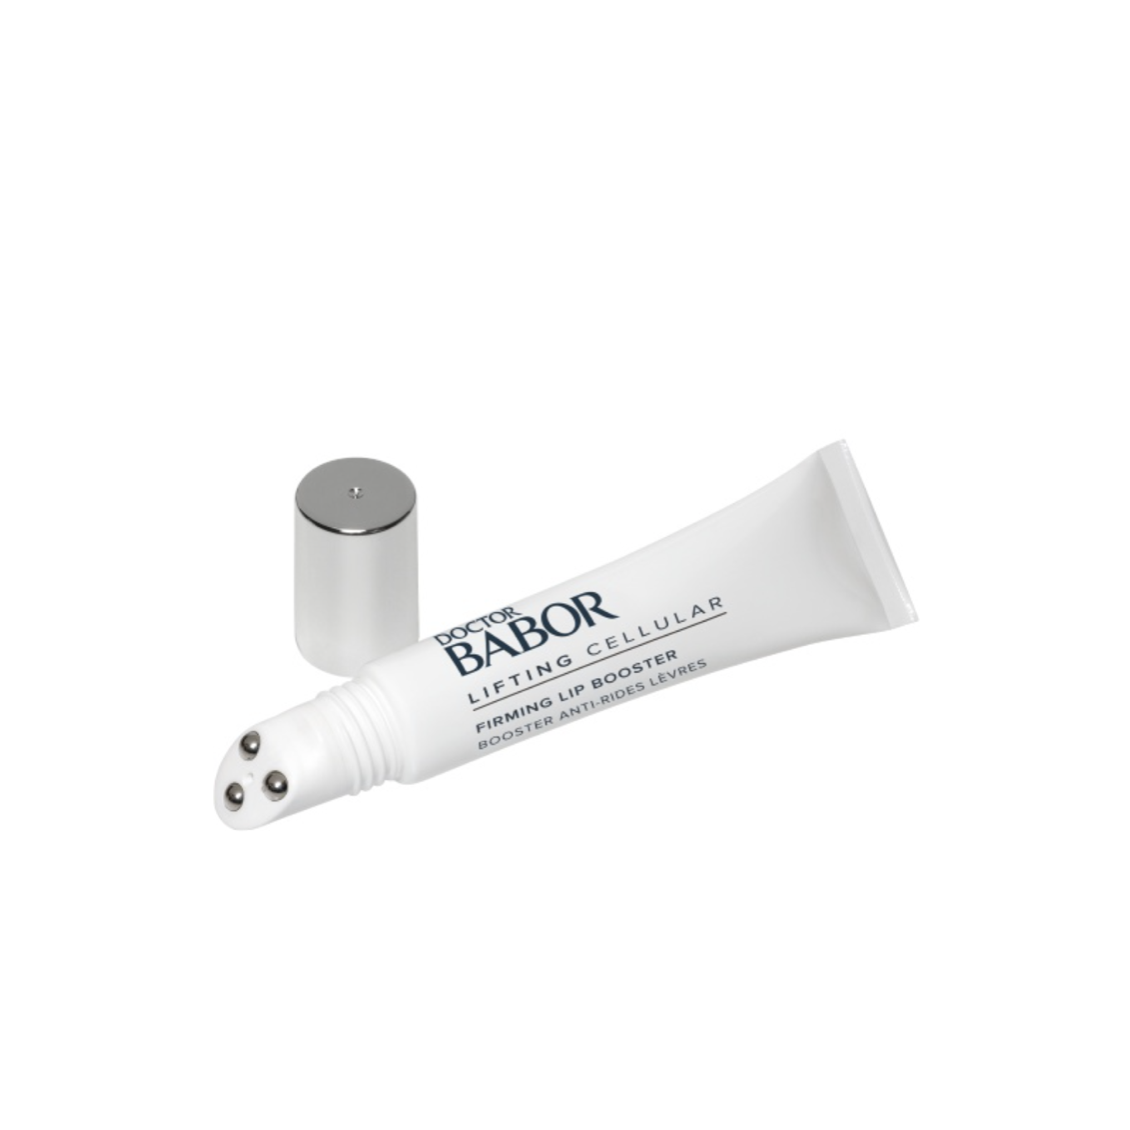 Doctor Babor, Babor Lifting Cellular Firming lip booster, Firming lip booster